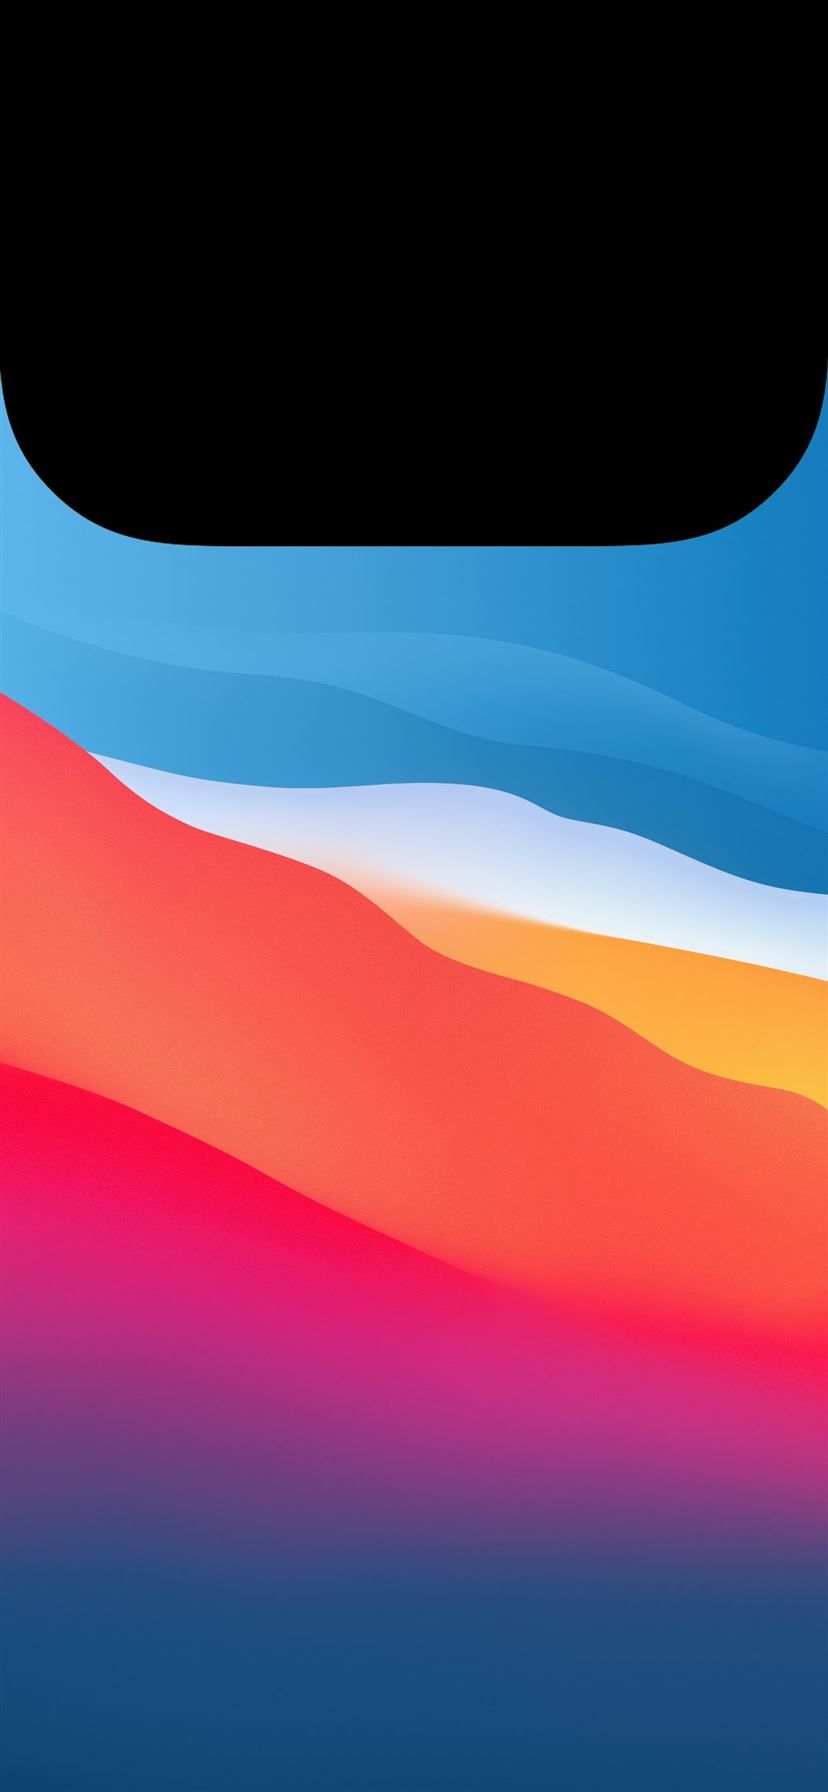 iPhone 11 Aesthetic Wallpapers - Wallpaper Cave